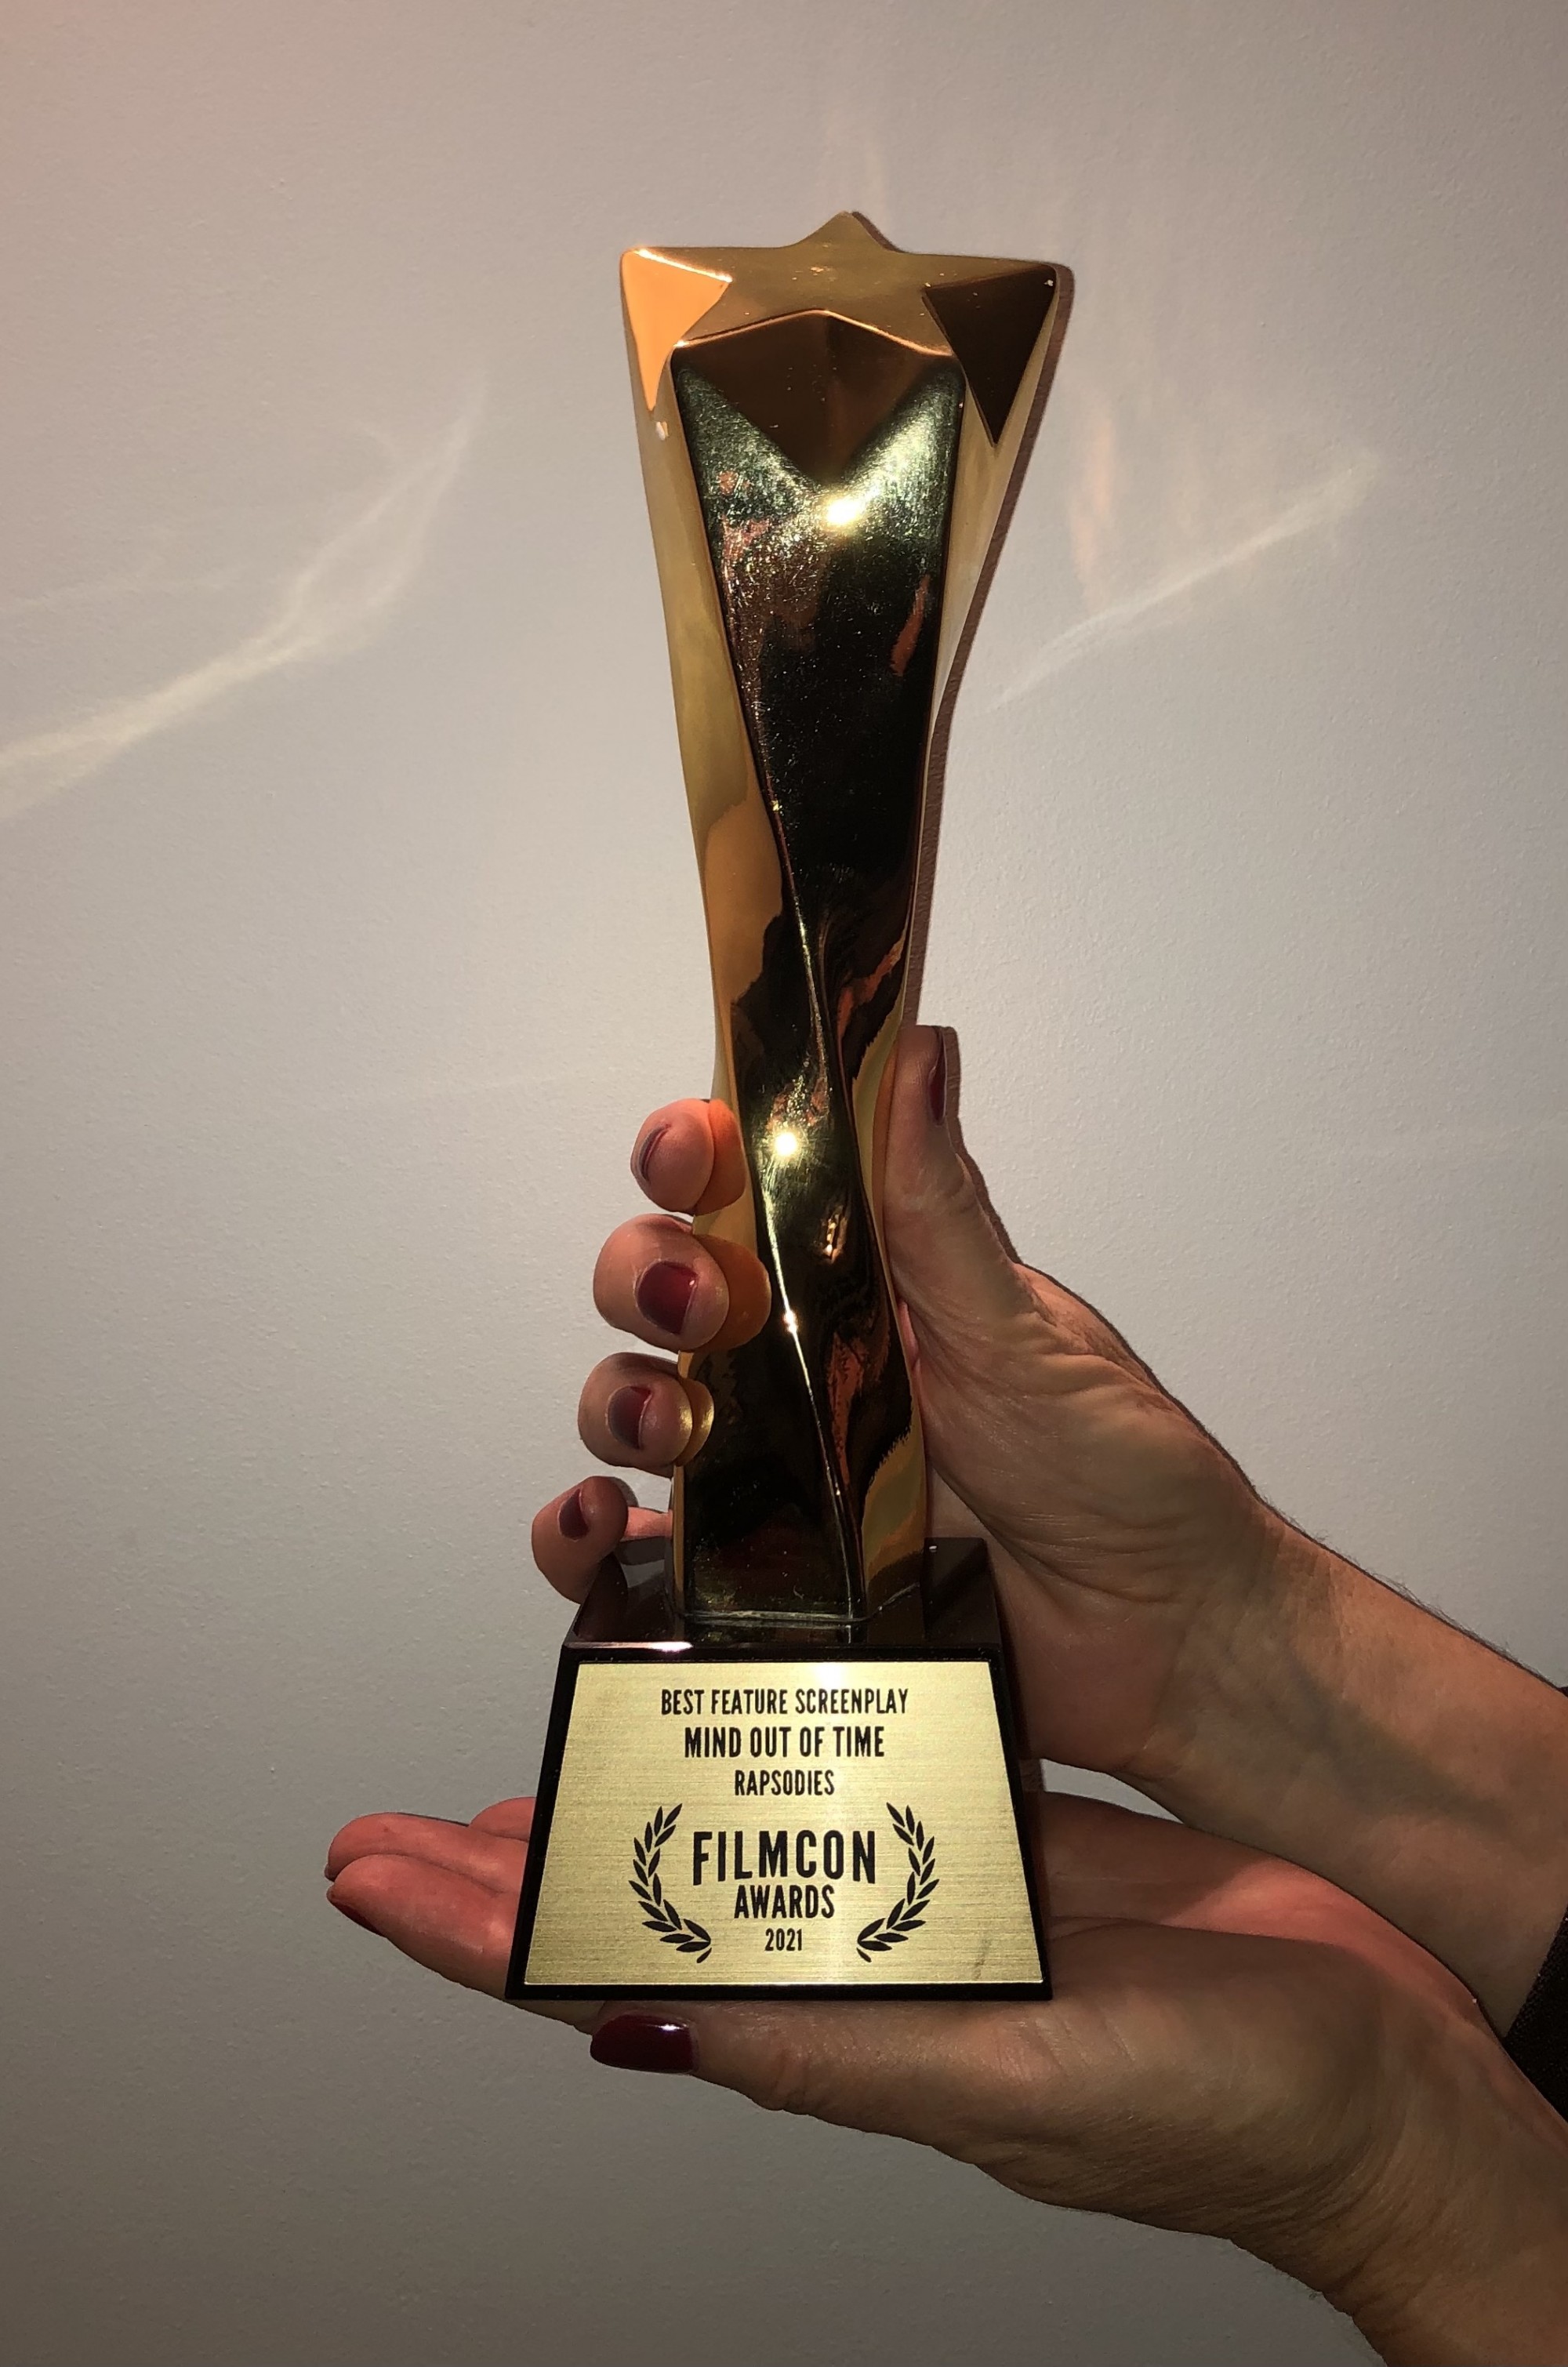 An interview with FilmCon winner Carole Starcevic ("Mind Out of Time")